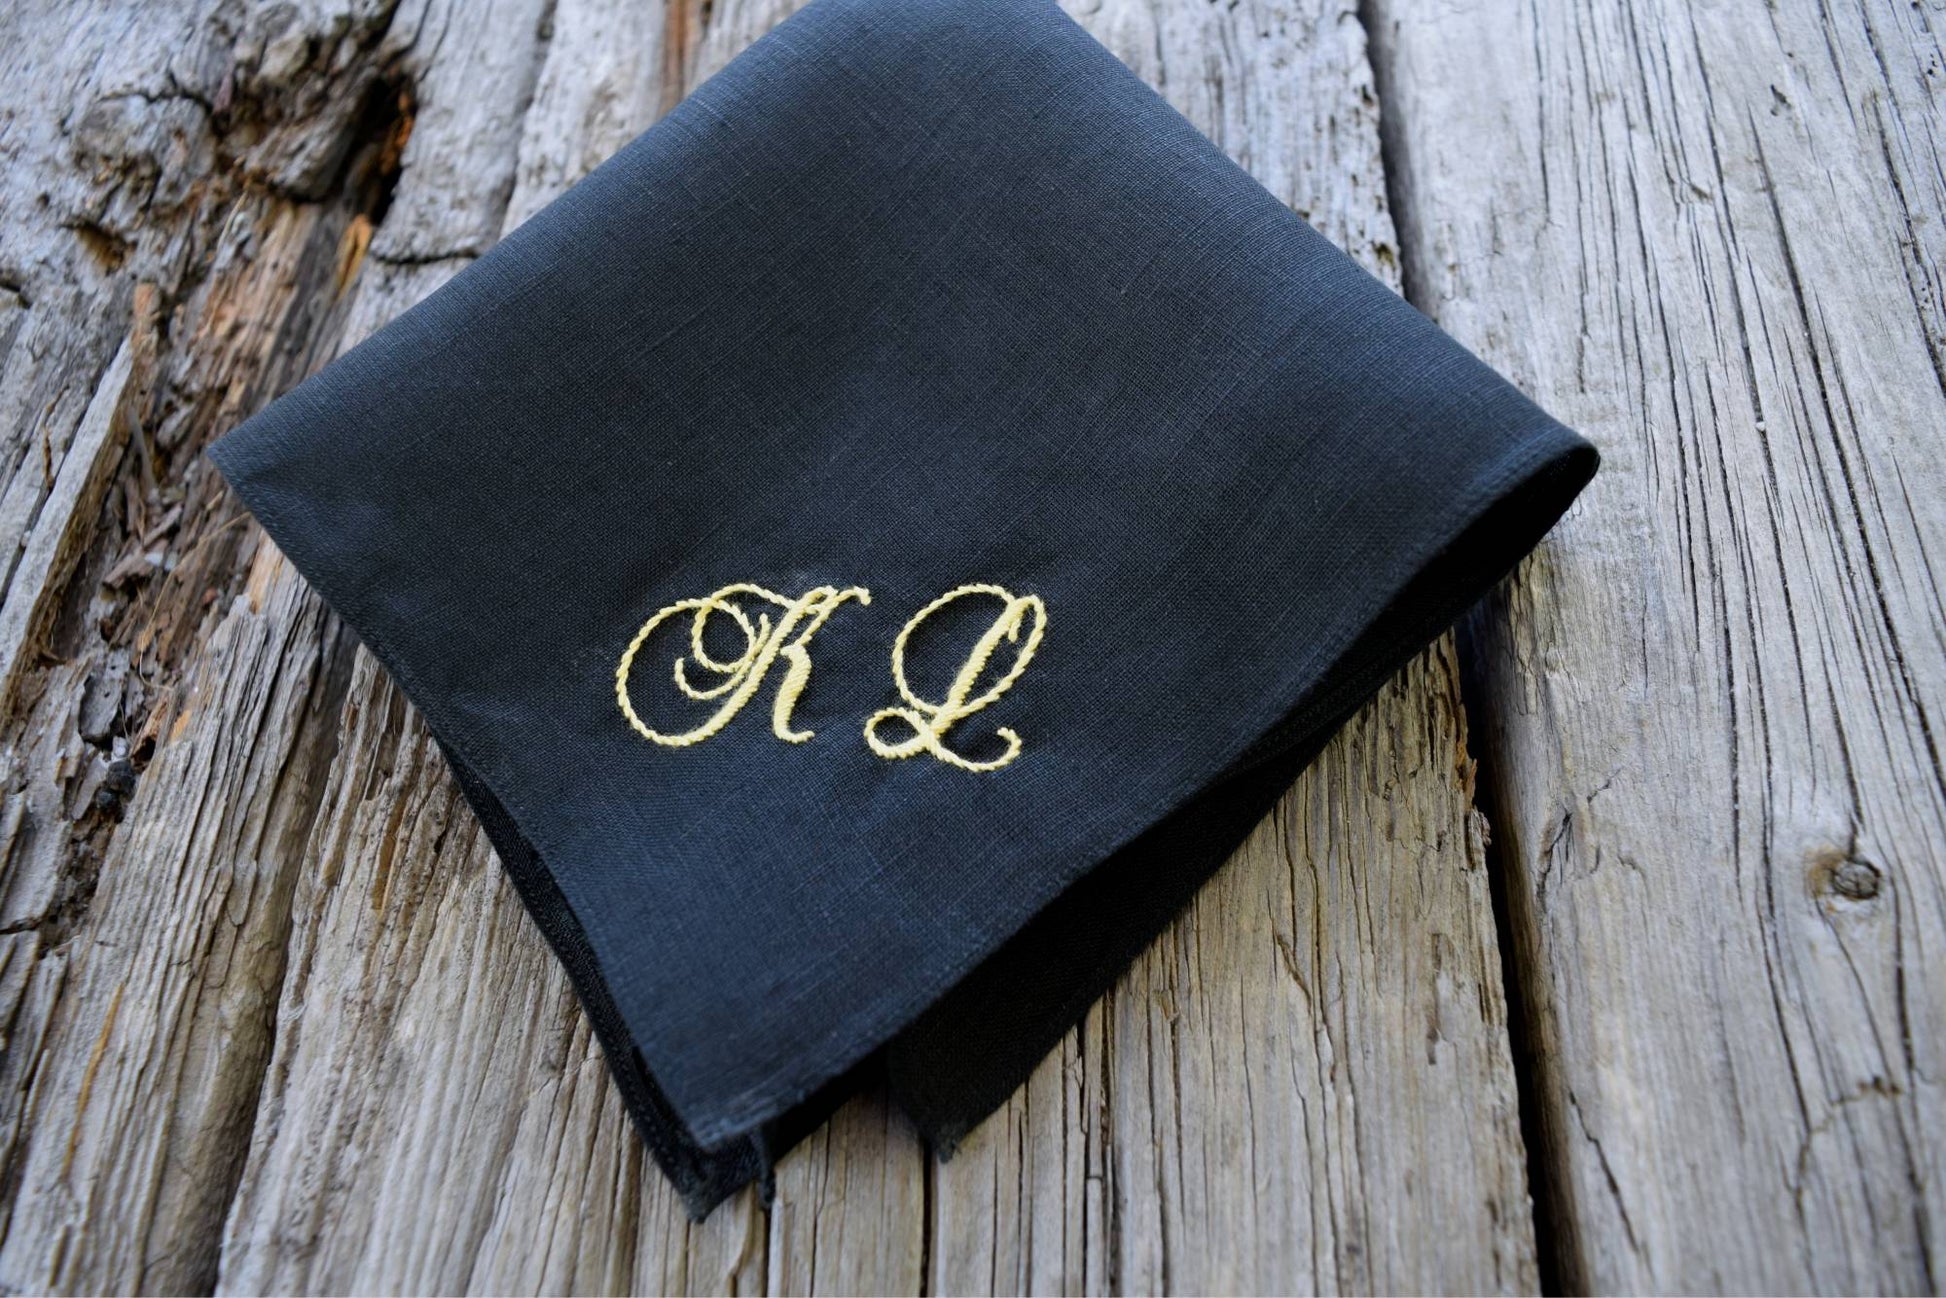 Black Irish linen pocket square hand embroidered with K L in yellow thread on wood background